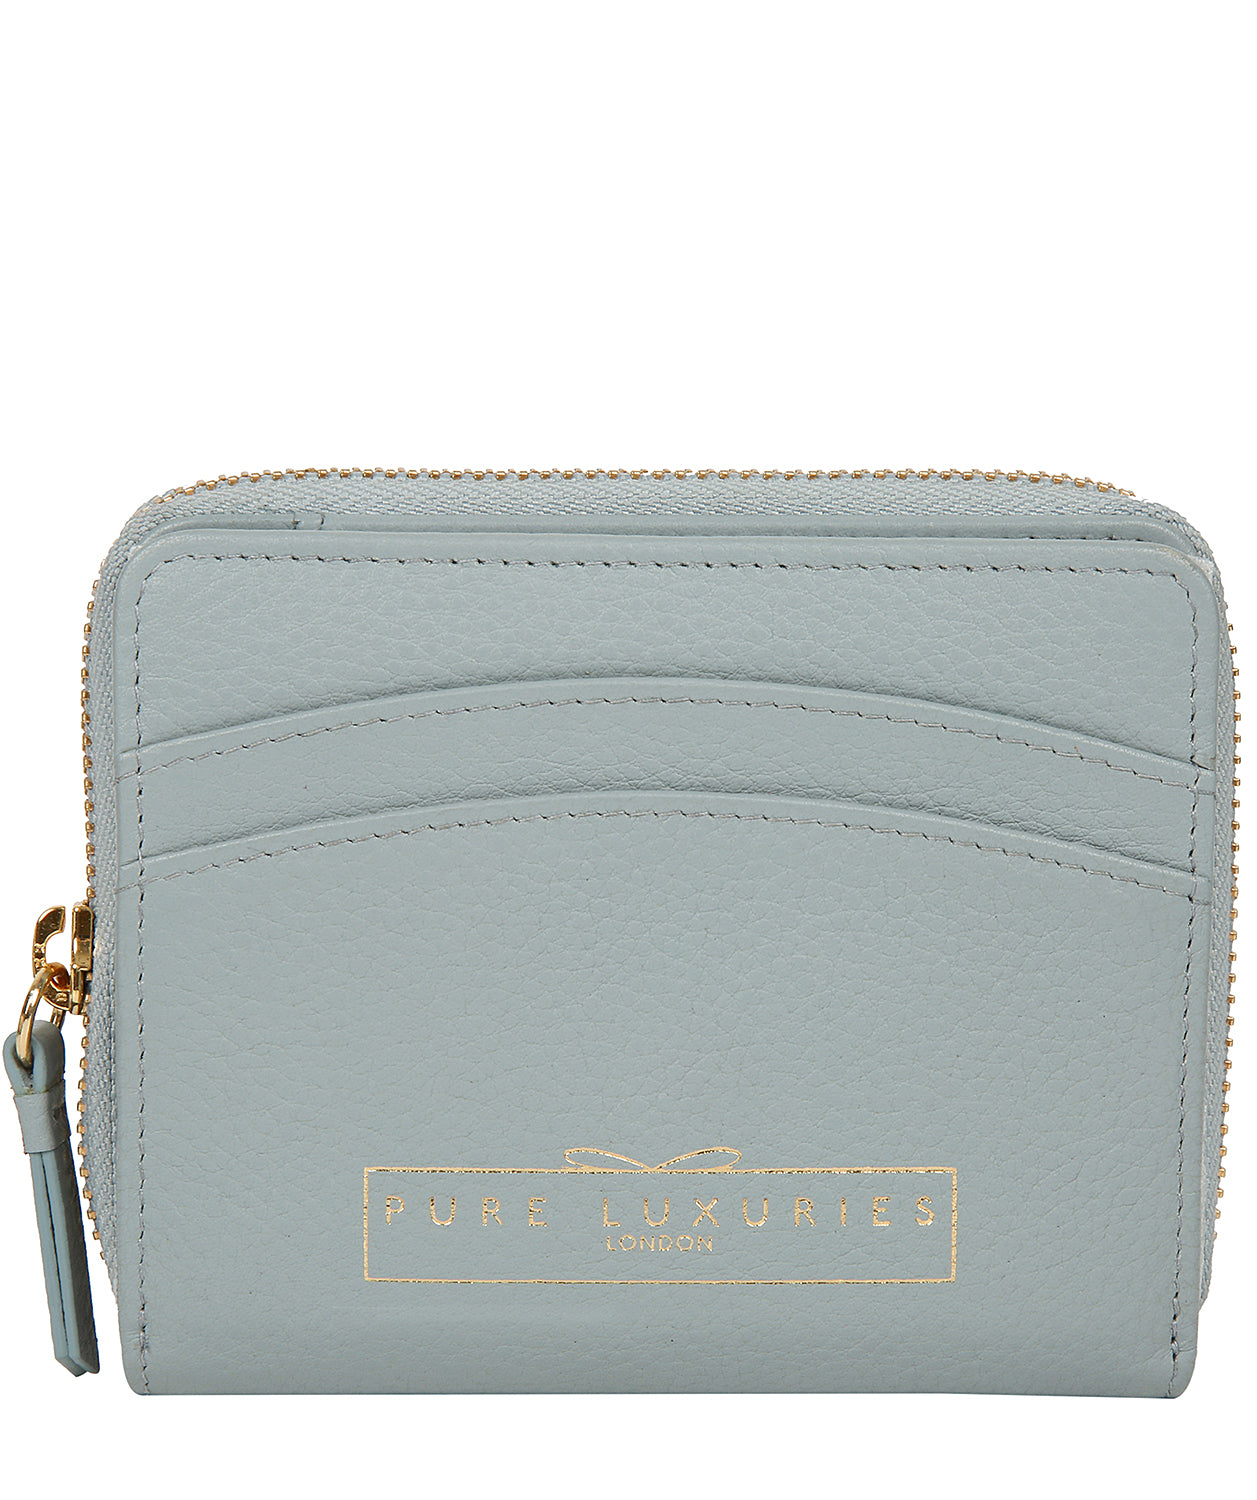 Blue Leather Purse 'Emely' by Pure Luxuries – Pure Luxuries London